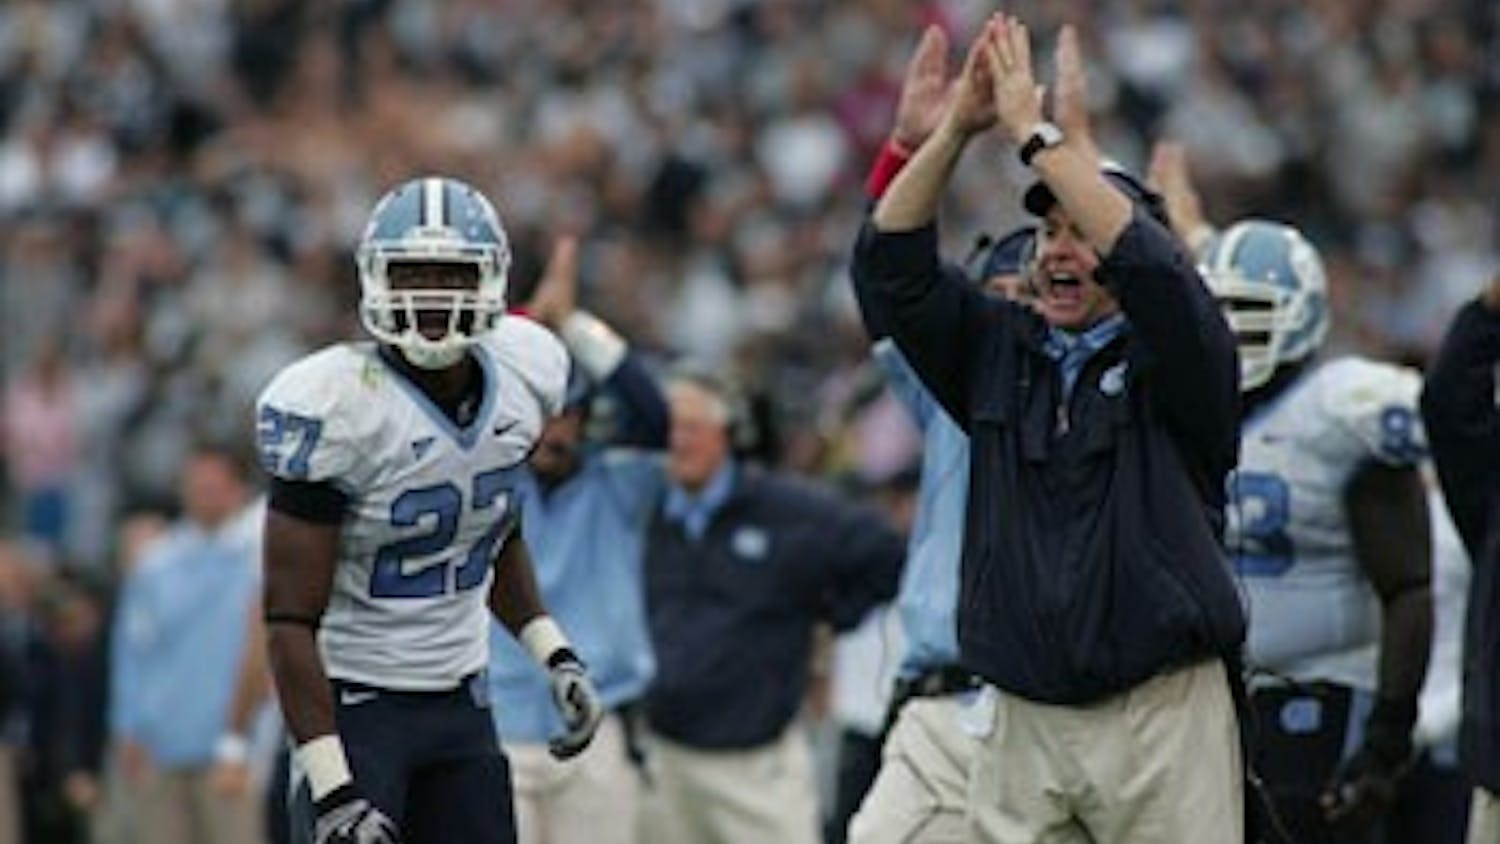 UNC safety Deunta Williams and head coach Butch Davis react to the game-winning safety.